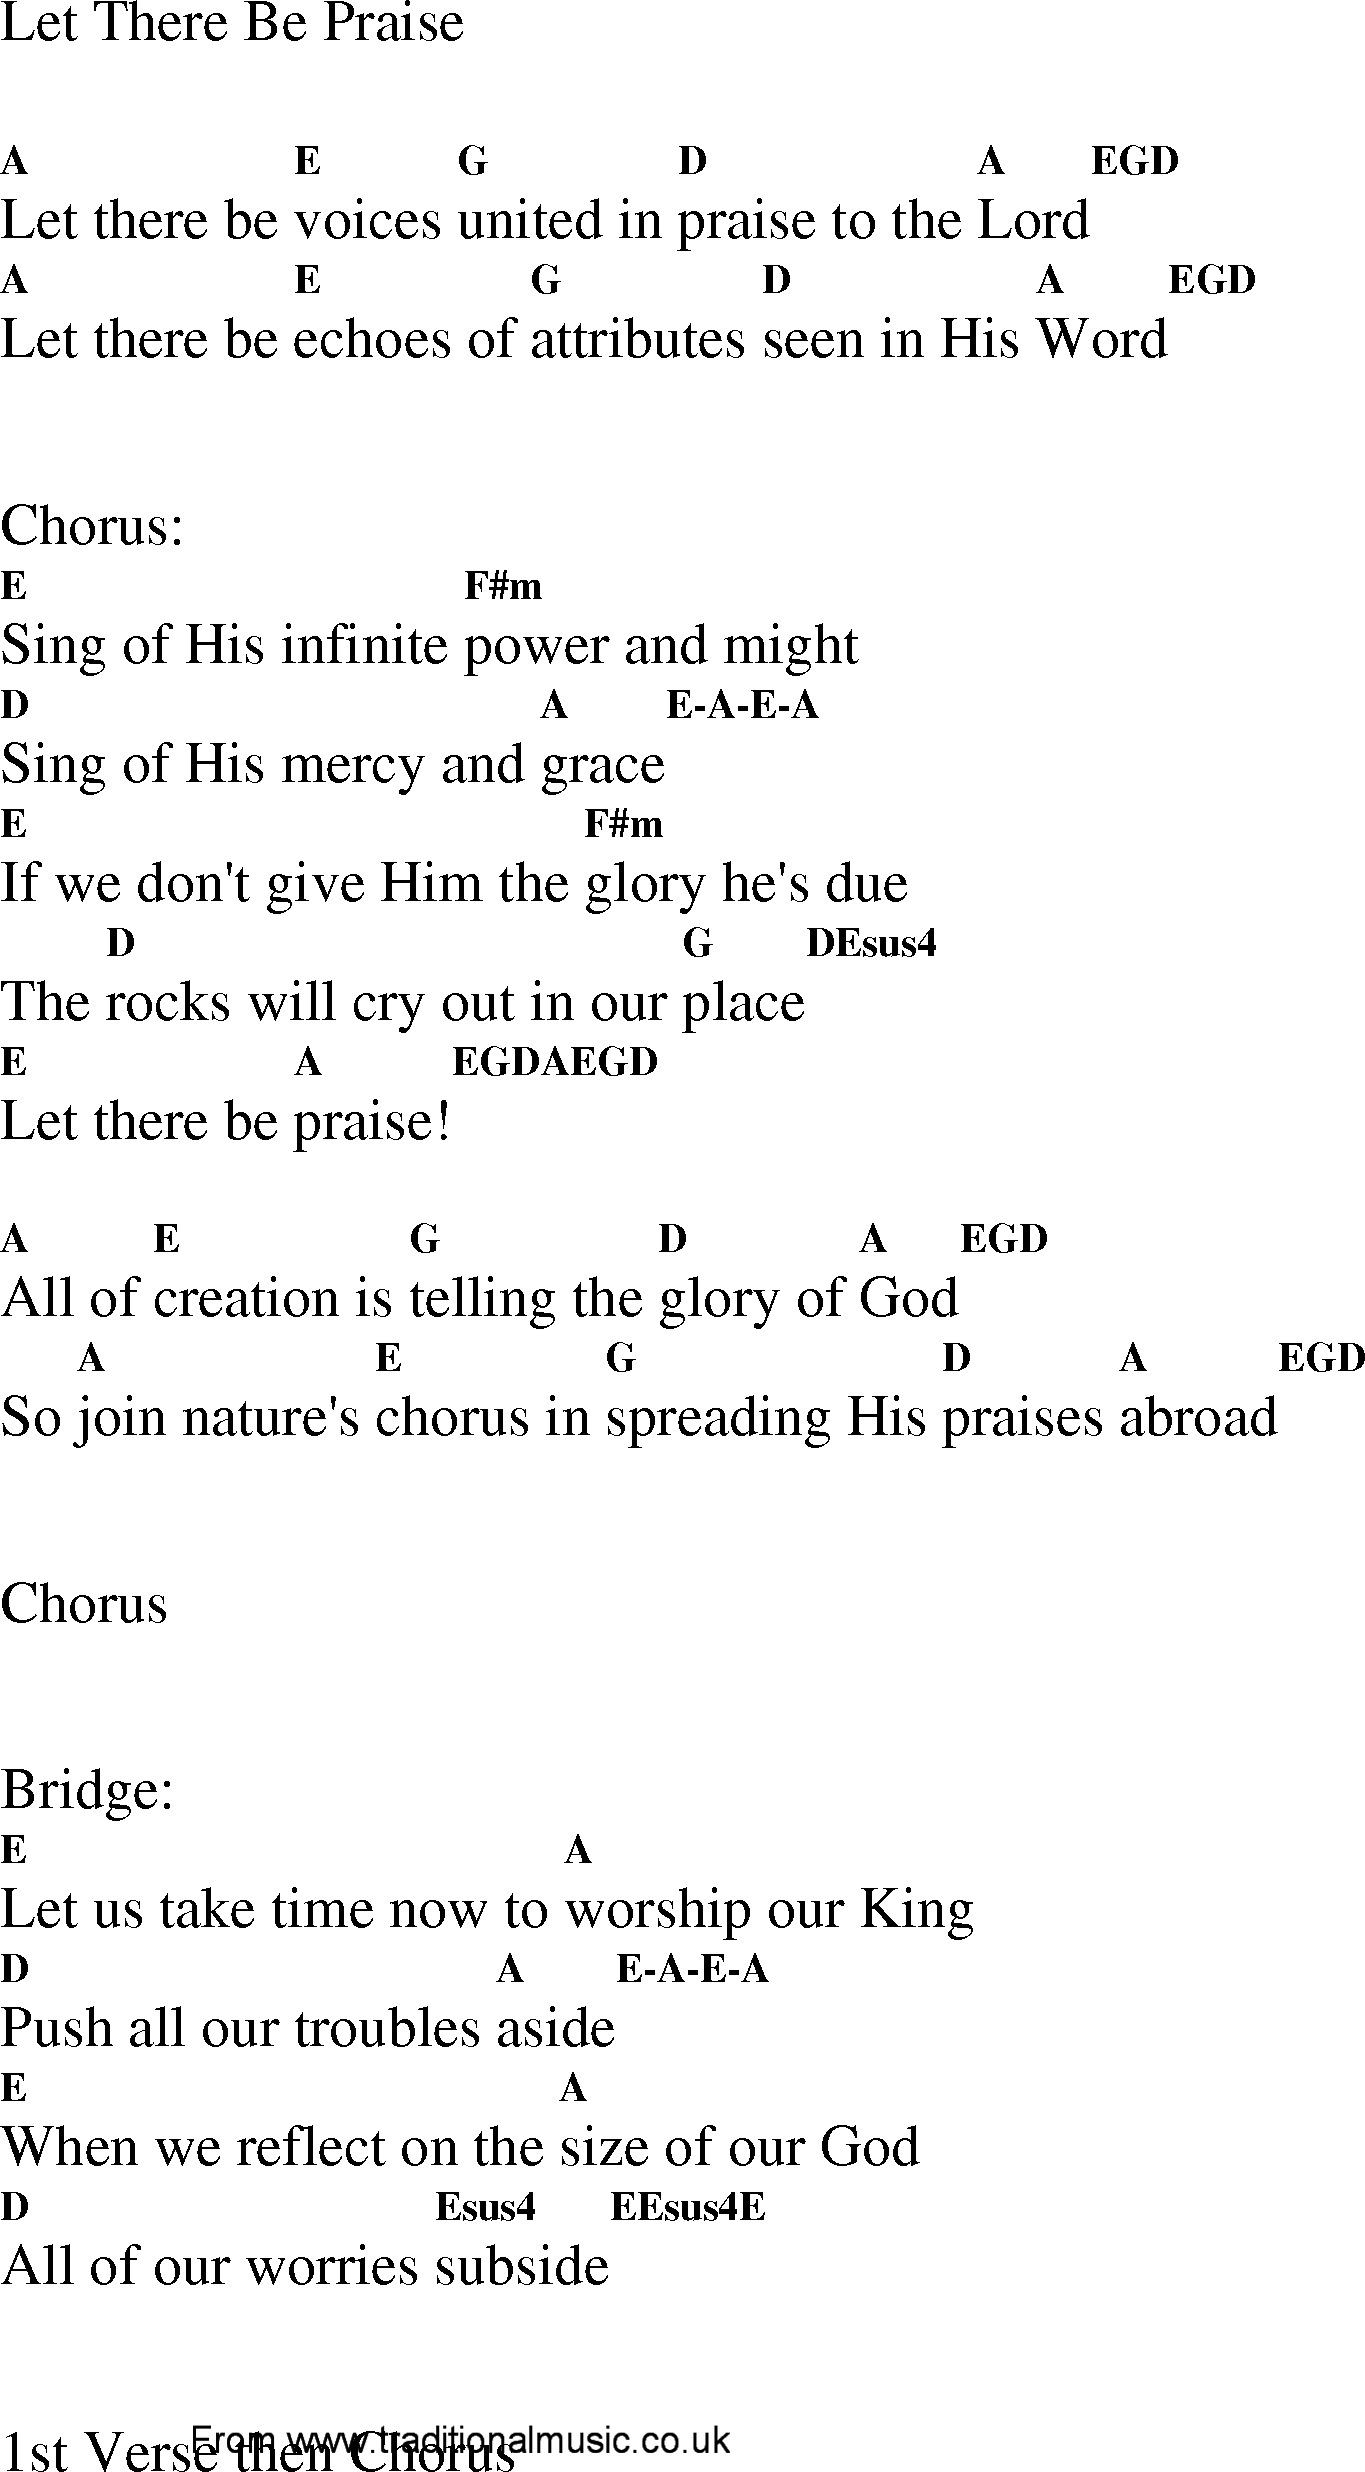 Gospel Song: let_there_be_praise, lyrics and chords.